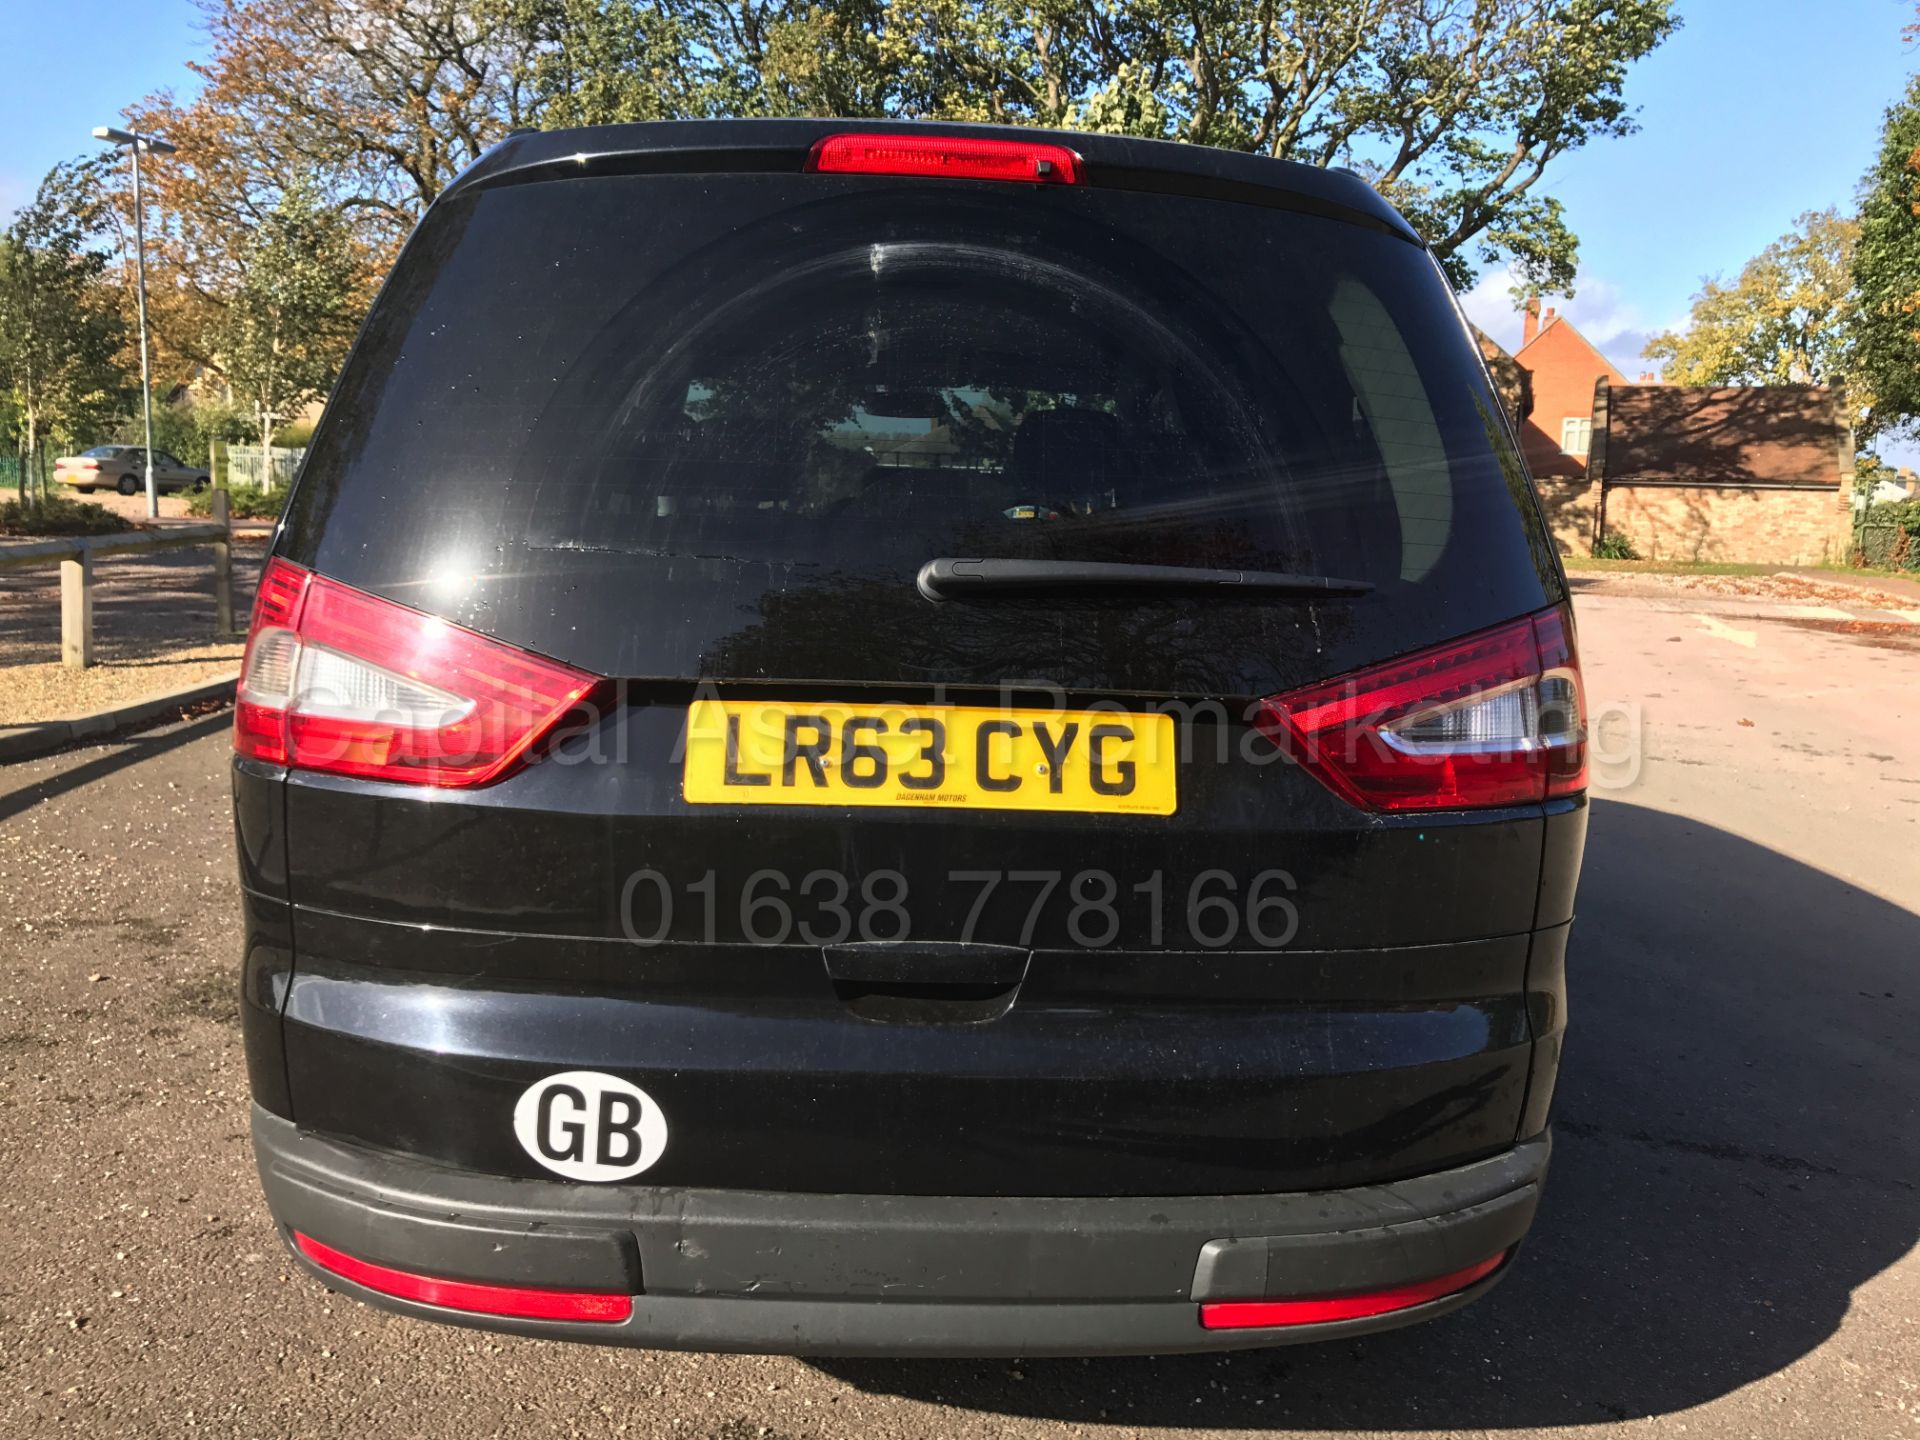 (ON SALE) FORD GALAXY 'ZETEC' 7 SEATER MPV (2014 MODEL) '2.0 TDCI -140 BHP' (1 OWNER) *FULL HISTORY* - Image 5 of 28